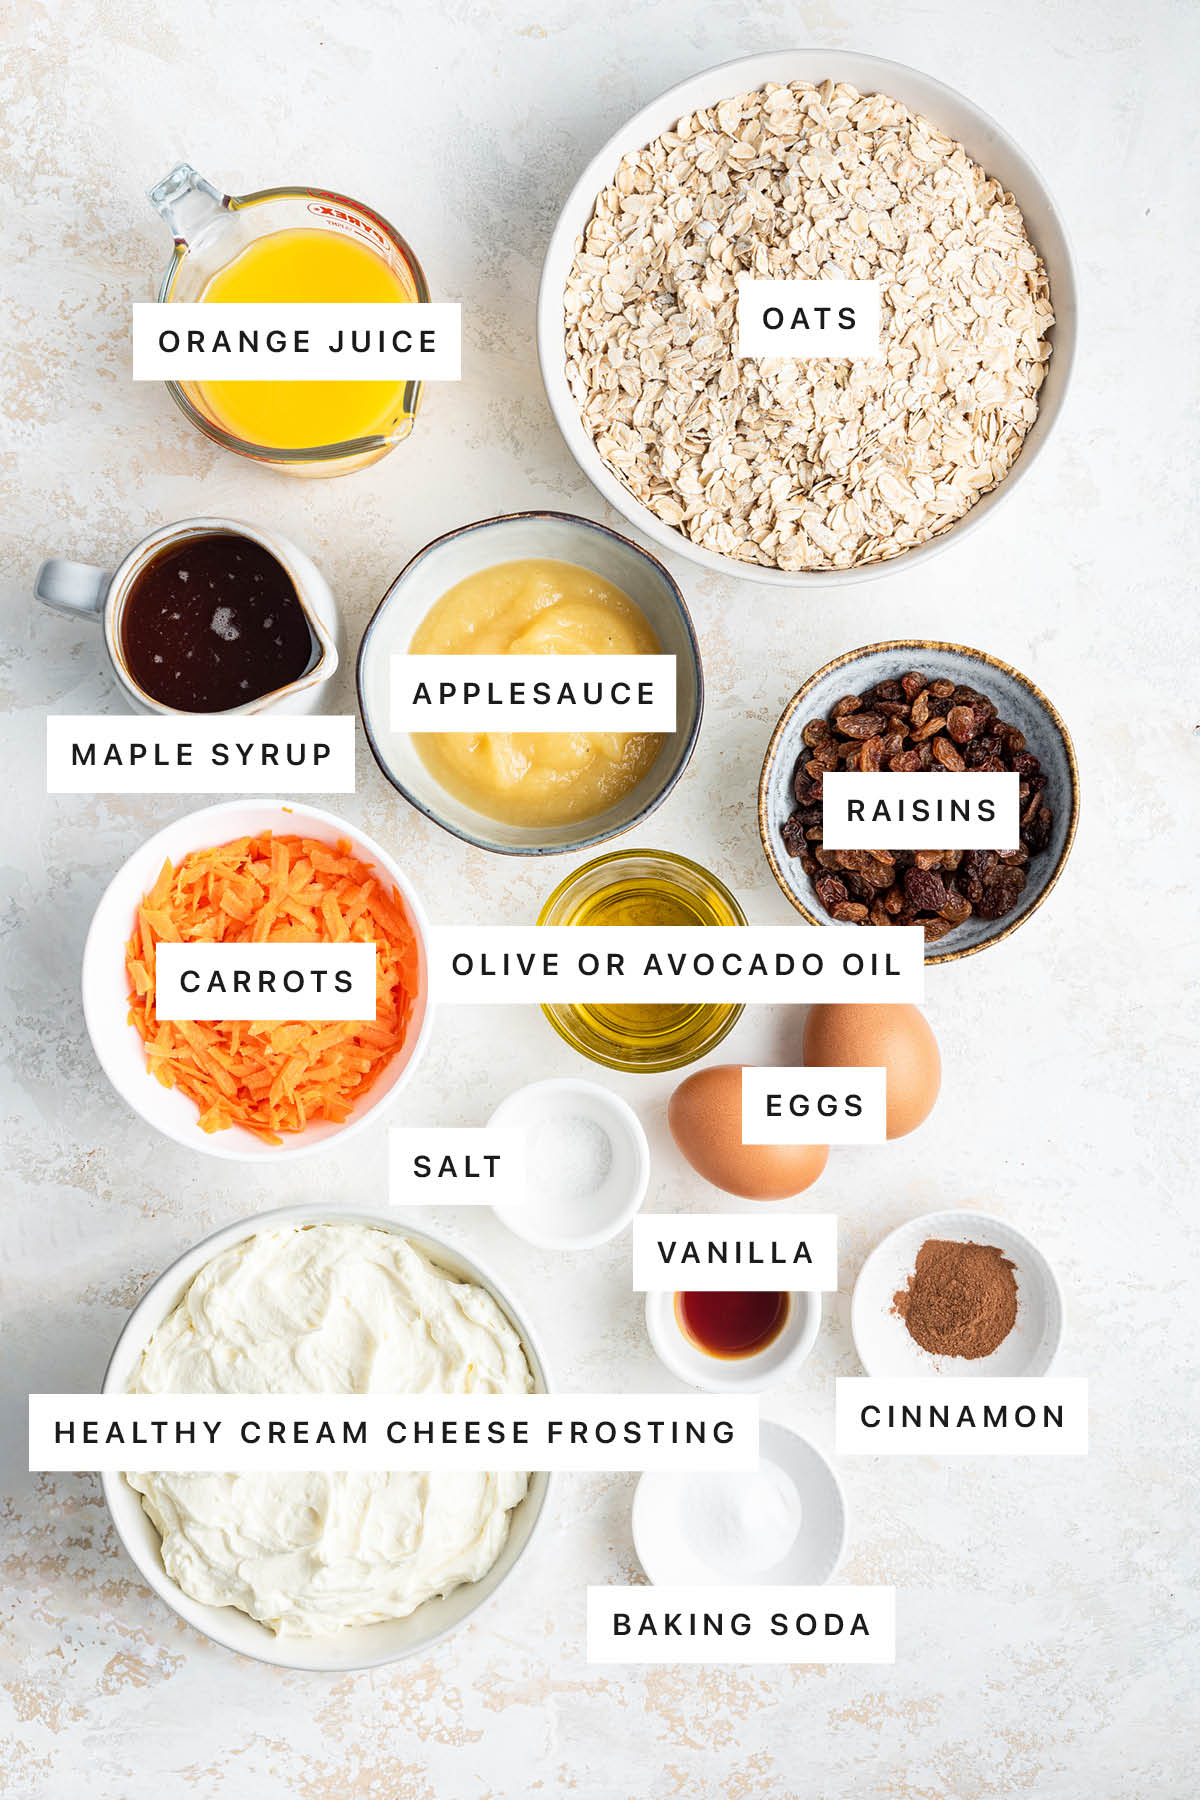 Ingredients measured out to make Oatmeal Carrot Cake: orange juice, oats, maple syrup, applesauce, raisins, carrots, olive oil, salt, eggs, vanilla, cinnamon, healthy cream cheese frosting and baking soda.